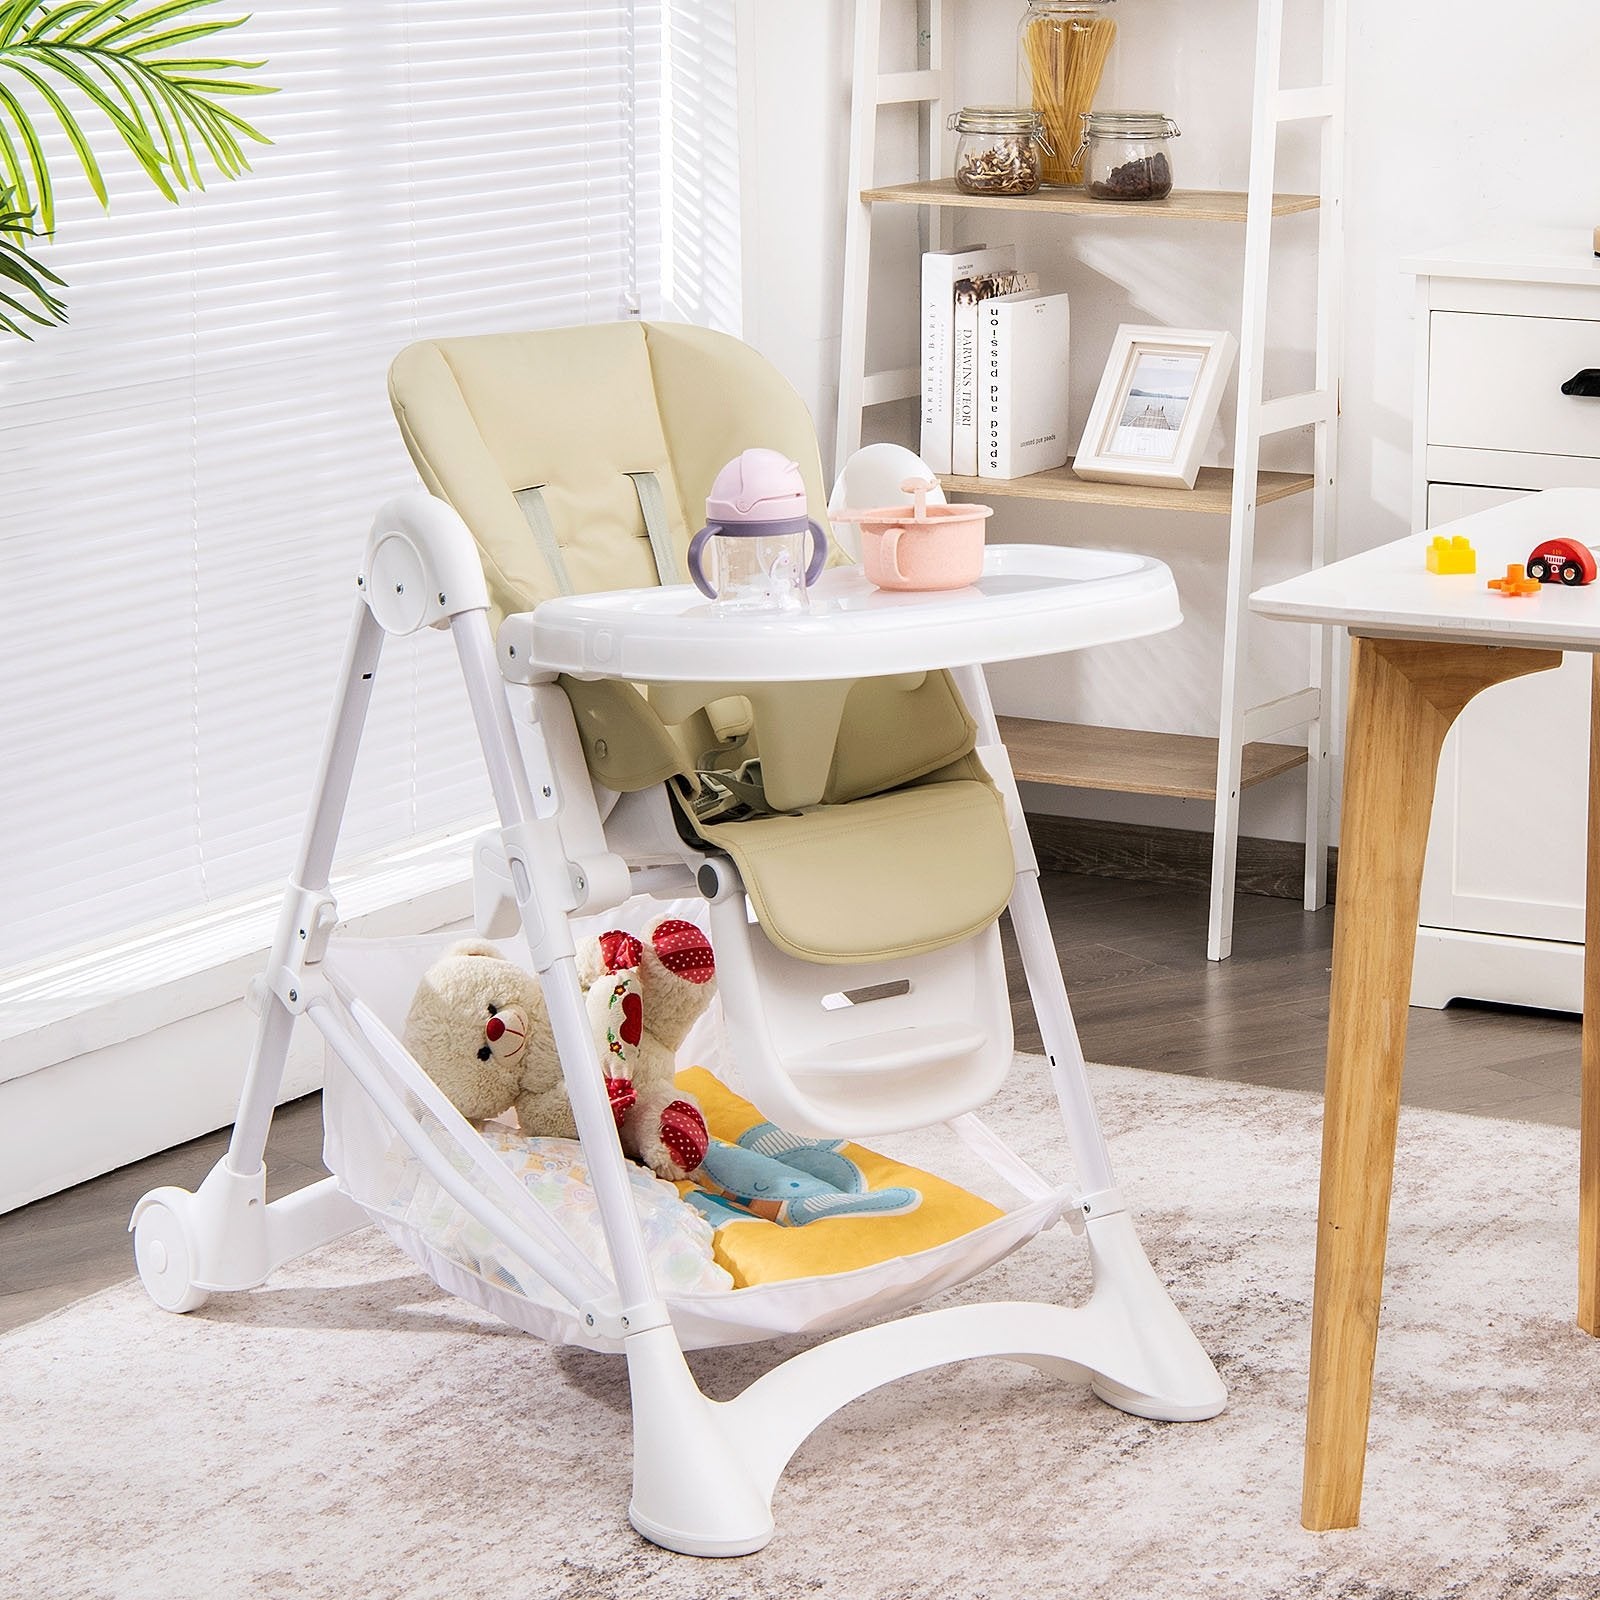 Baby Convertible Folding Adjustable High Chair with Wheel Tray Storage Basket, Beige - Gallery Canada